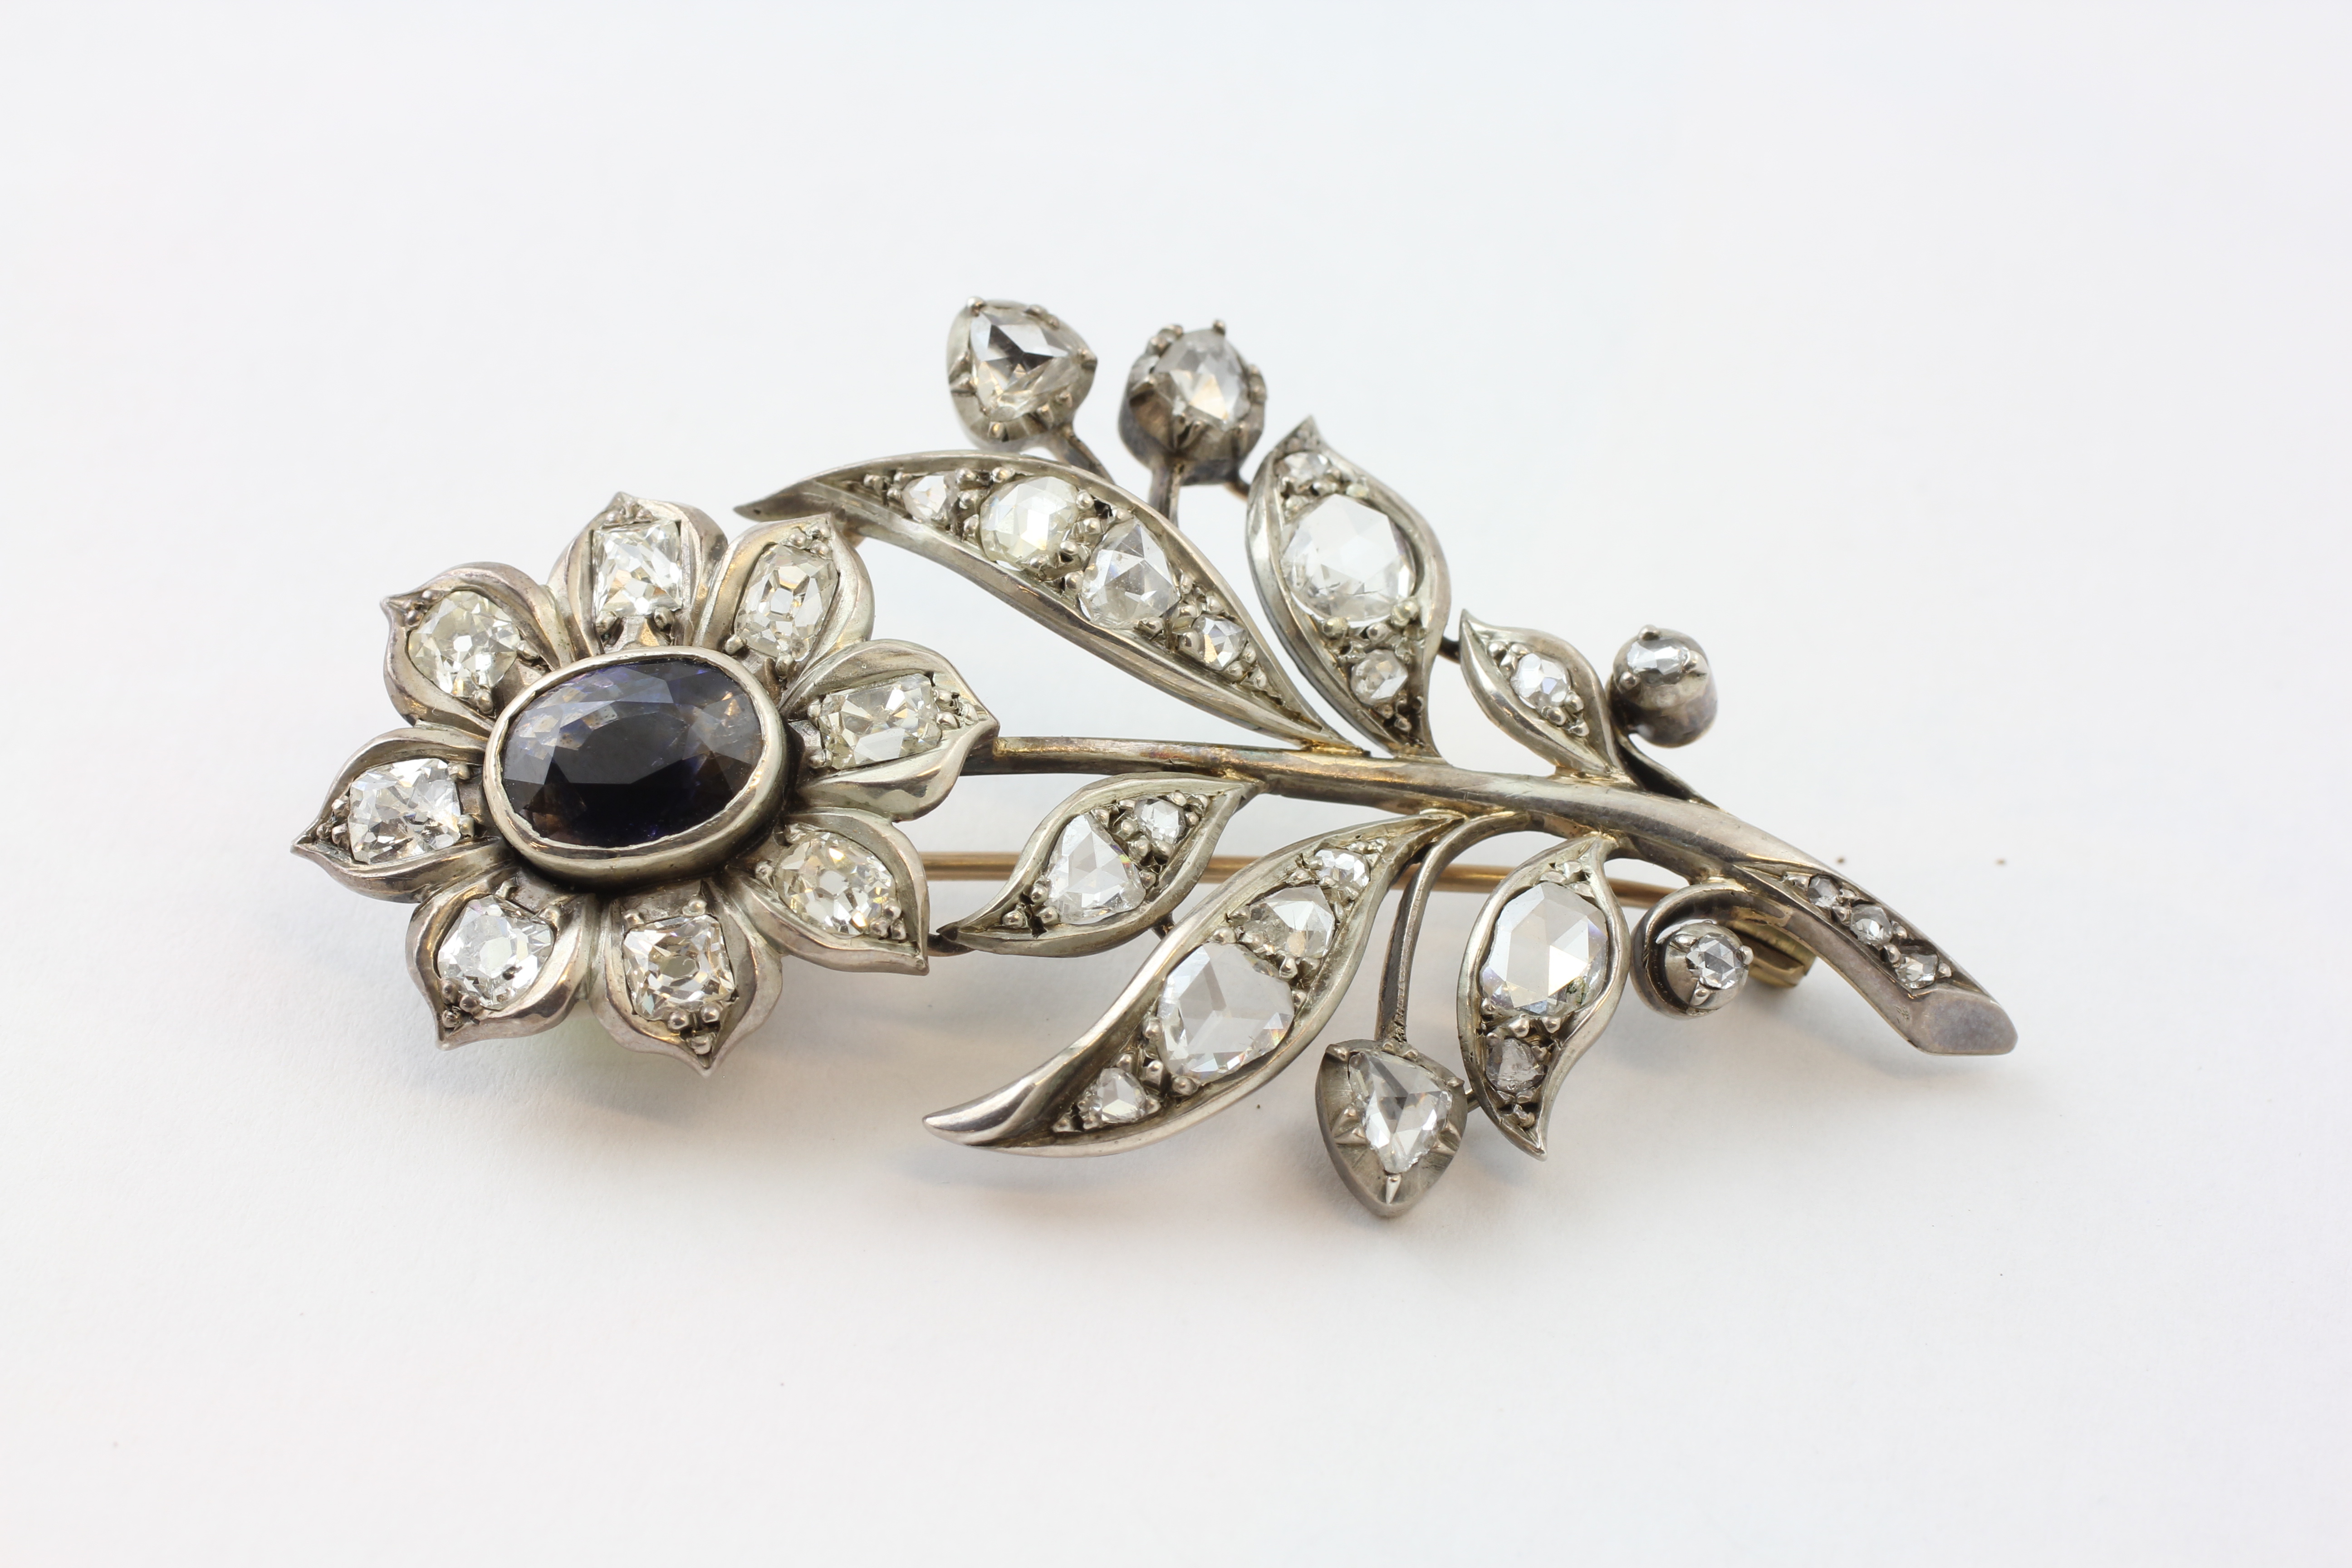 A SAPPHIRE AND DIAMOND BROOCH OF FLOWER DESIGN, SET WITH 36 OLD CUT DIAMONDS,